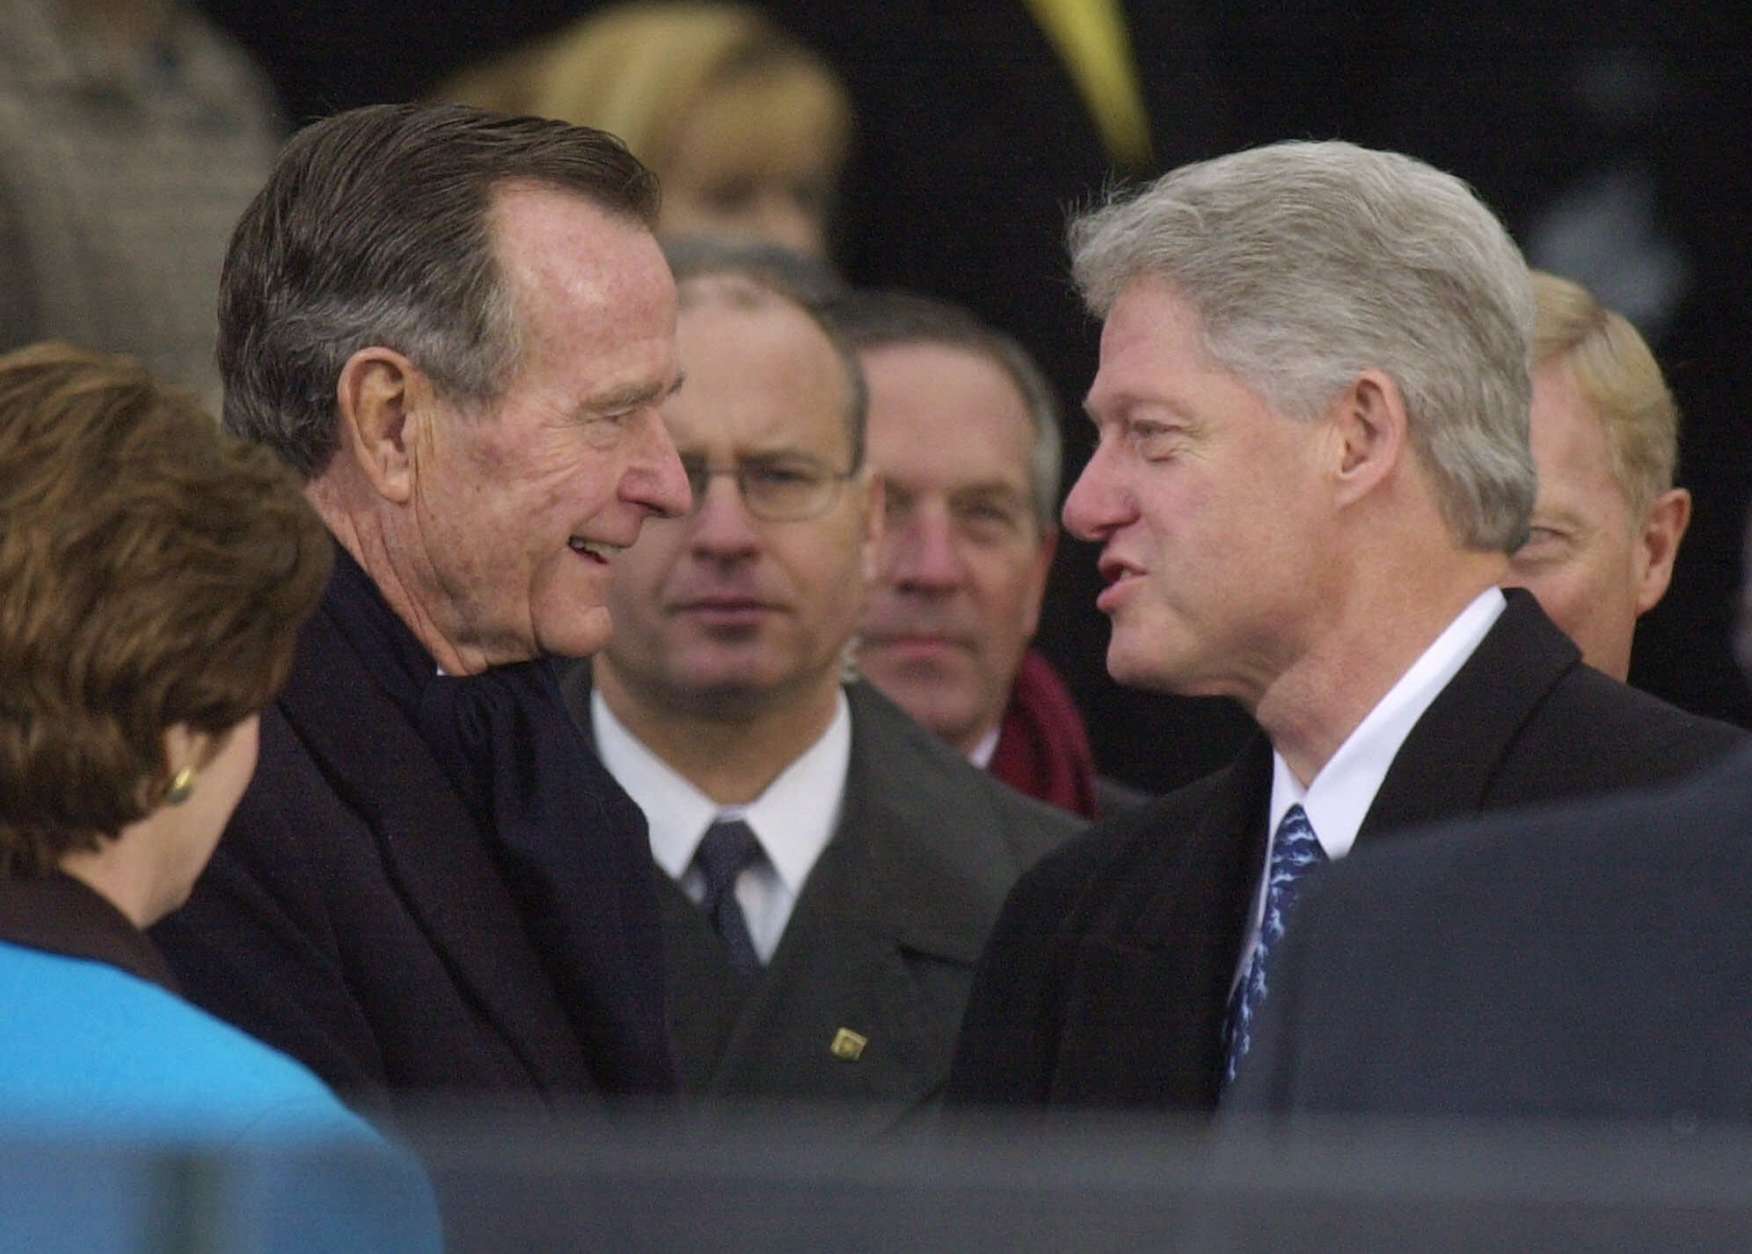 President Clinton is greeted by former President George Bush as he arrives at the U.S. Capitol for inauguration ceremonies Saturday, Jan. 20, 2001, in Washington. (AP Photo/Ron Edmonds)